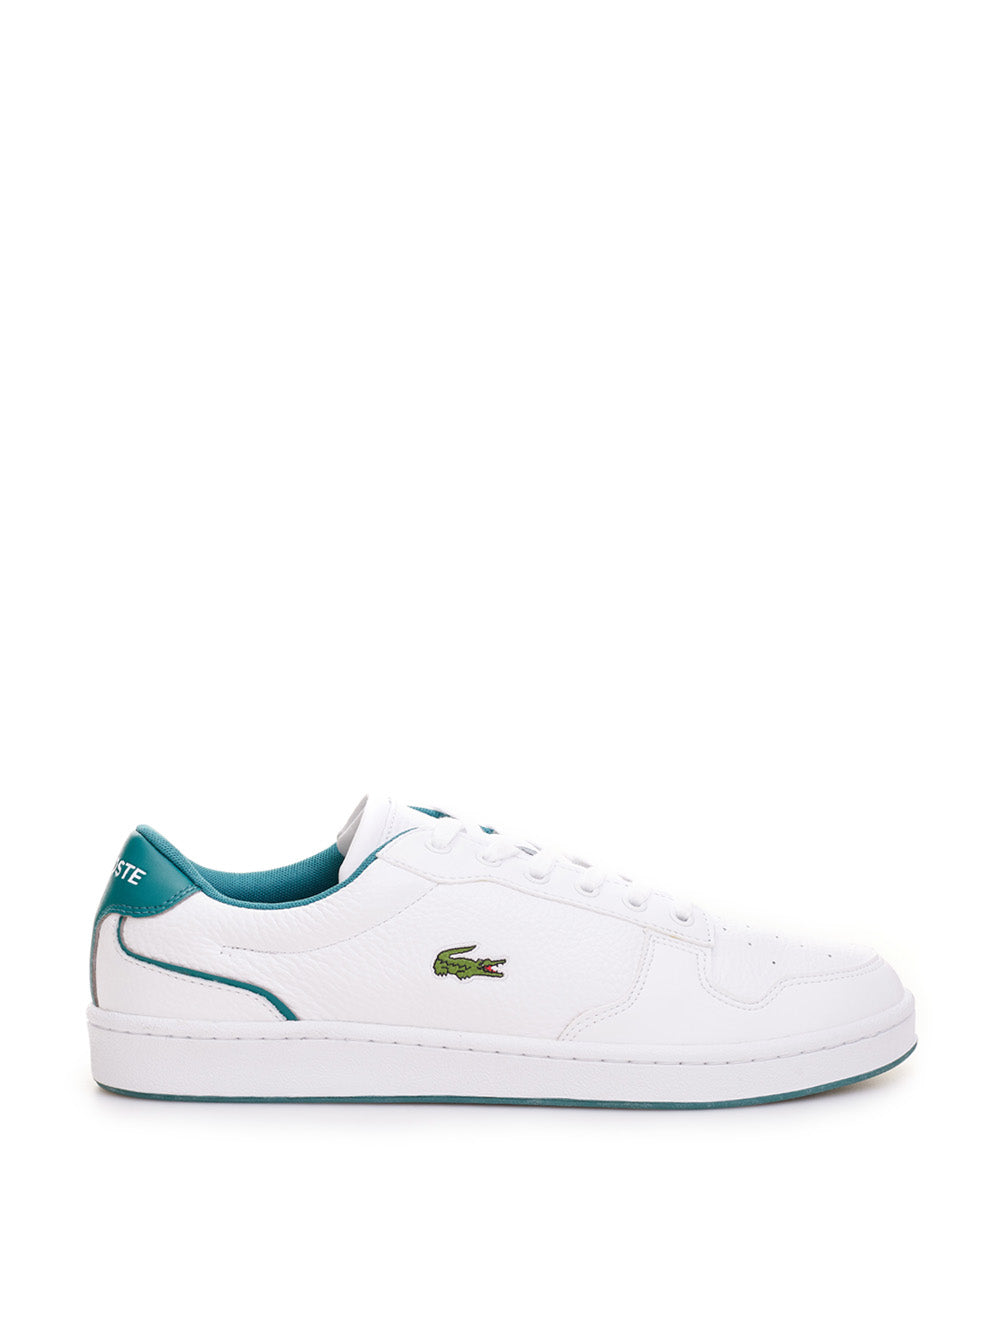 Lacoste Masters Cup 120 sneakers